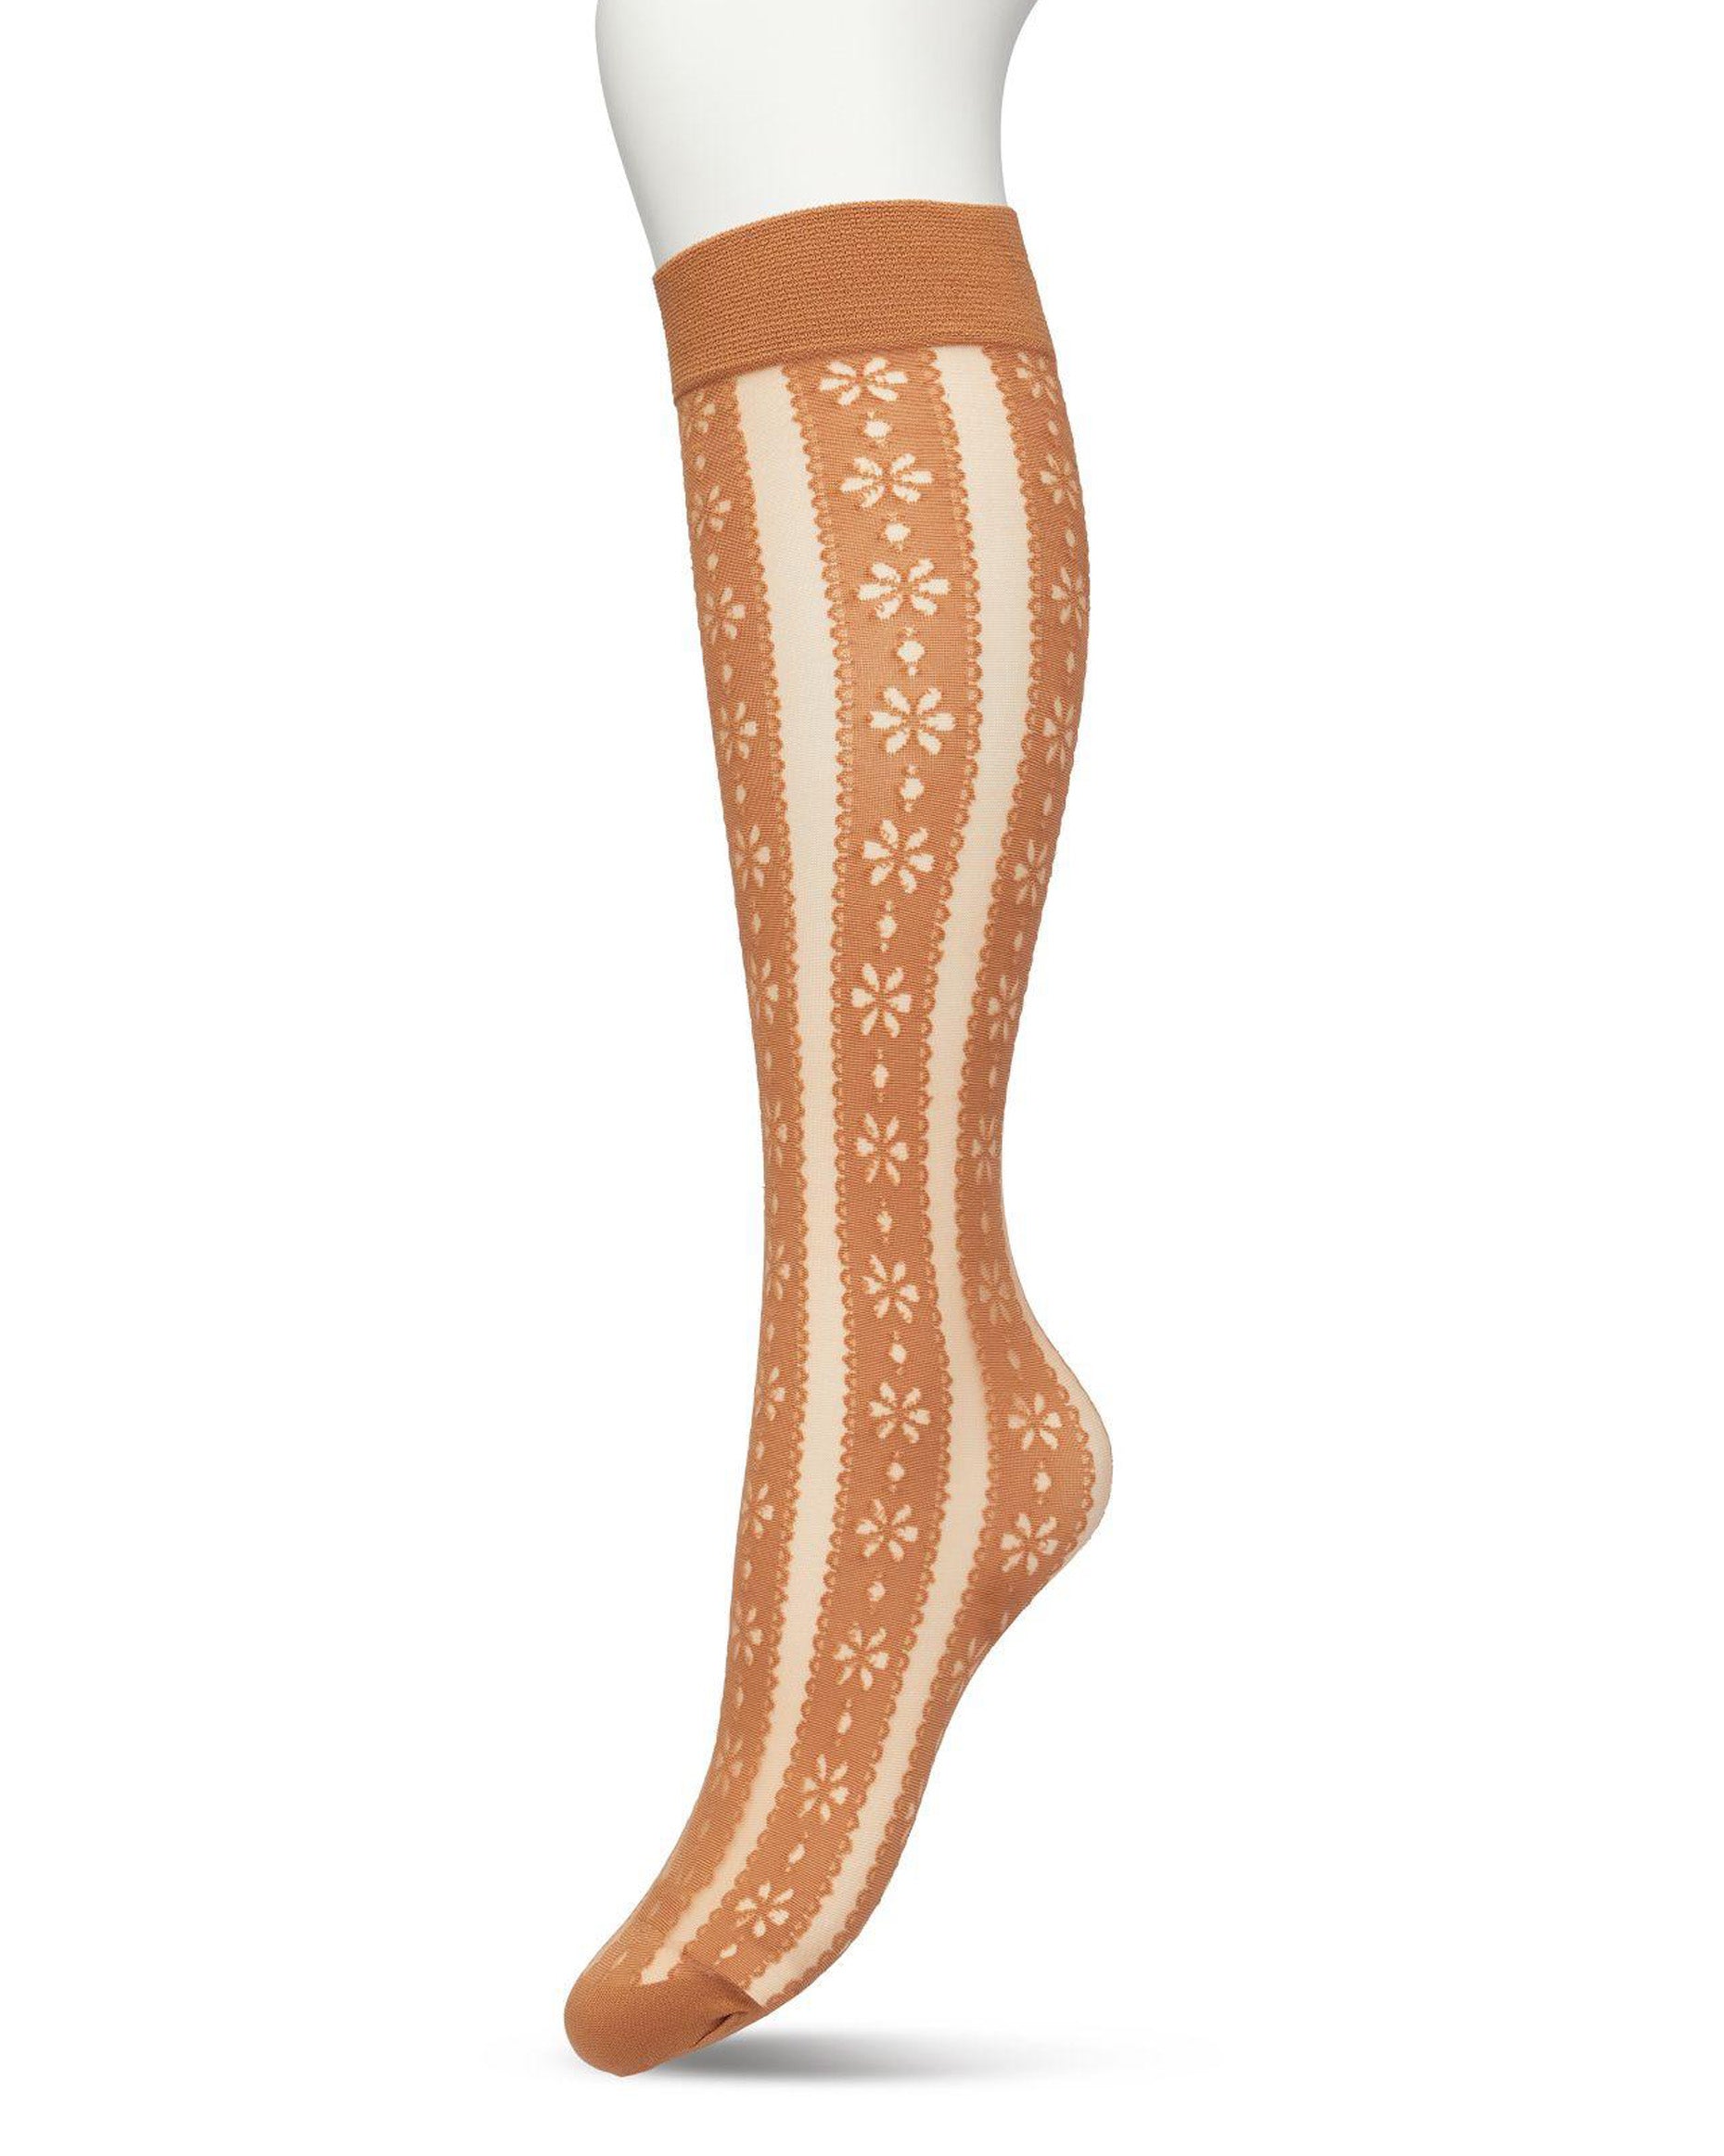 Bonnie Doon Flower Stripe Knee-Highs - Camel rust coloured fashion knee-high socks with a vertical stripe pattern with a flower and dot design with scalloped edge, reinforced toe and deep elasticated comfort cuff